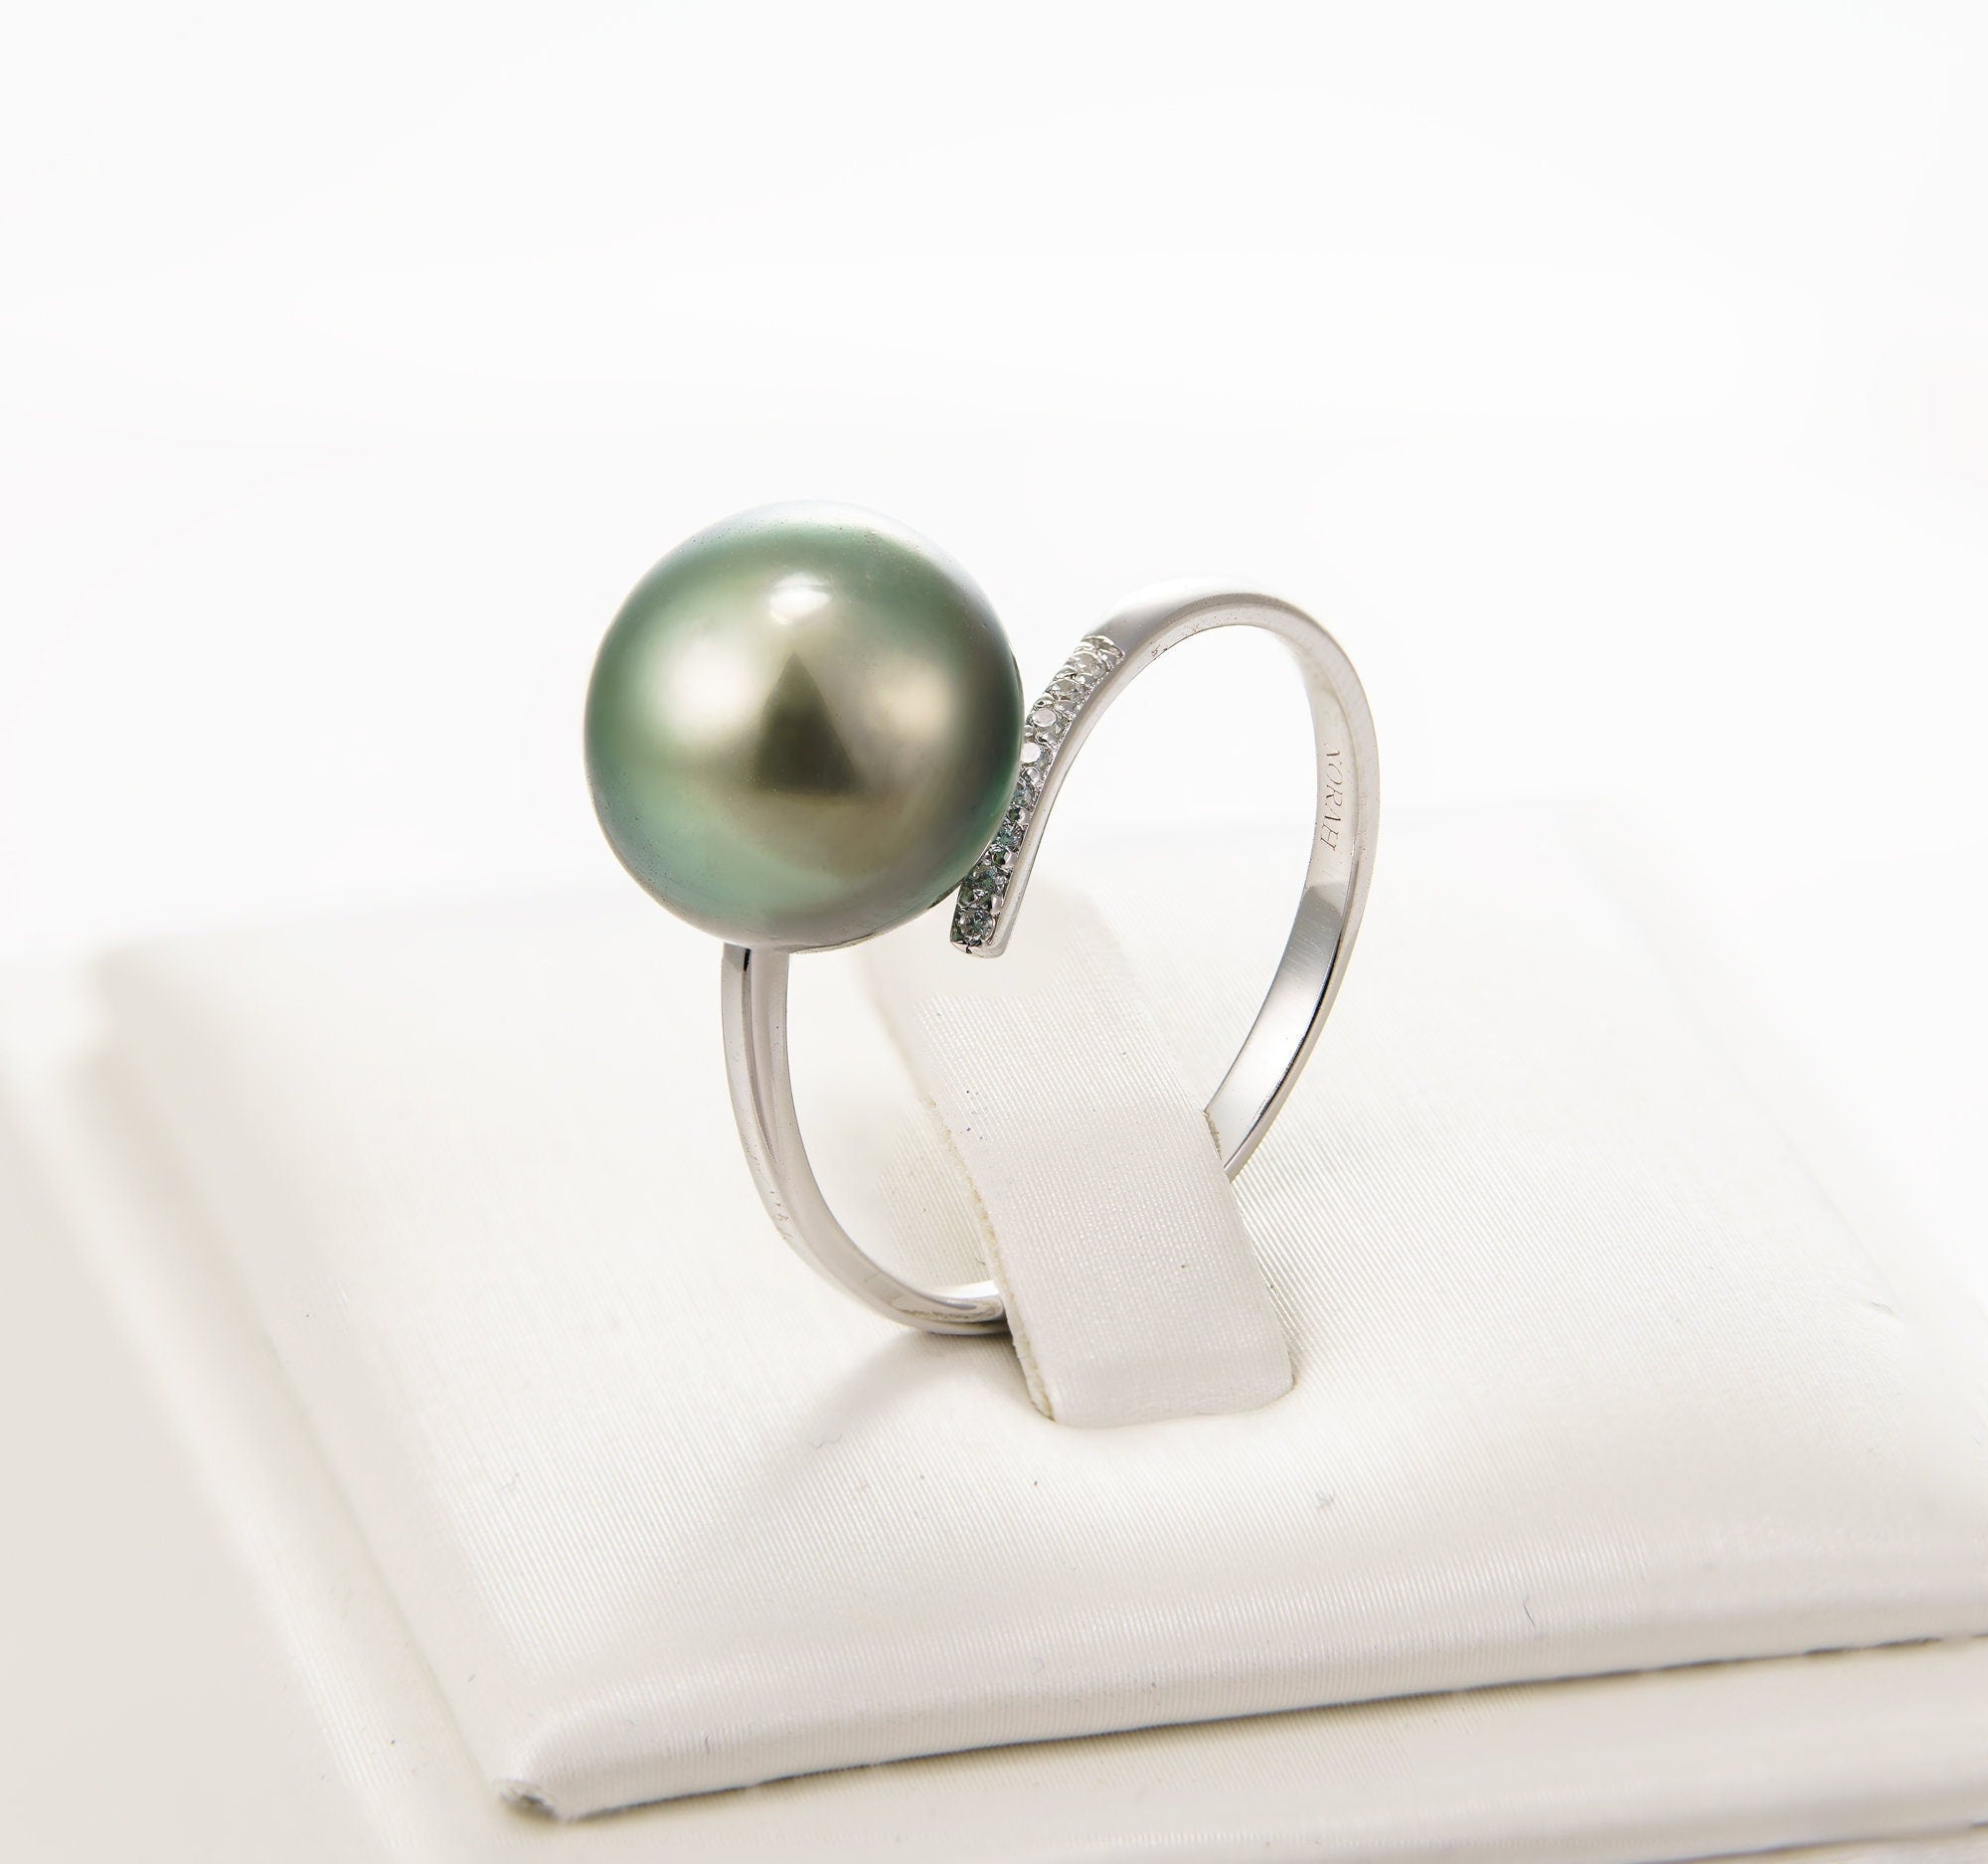 11mm tahitian pearl ring, size 9.5 us, 925 sterling silver with cubic zirconia